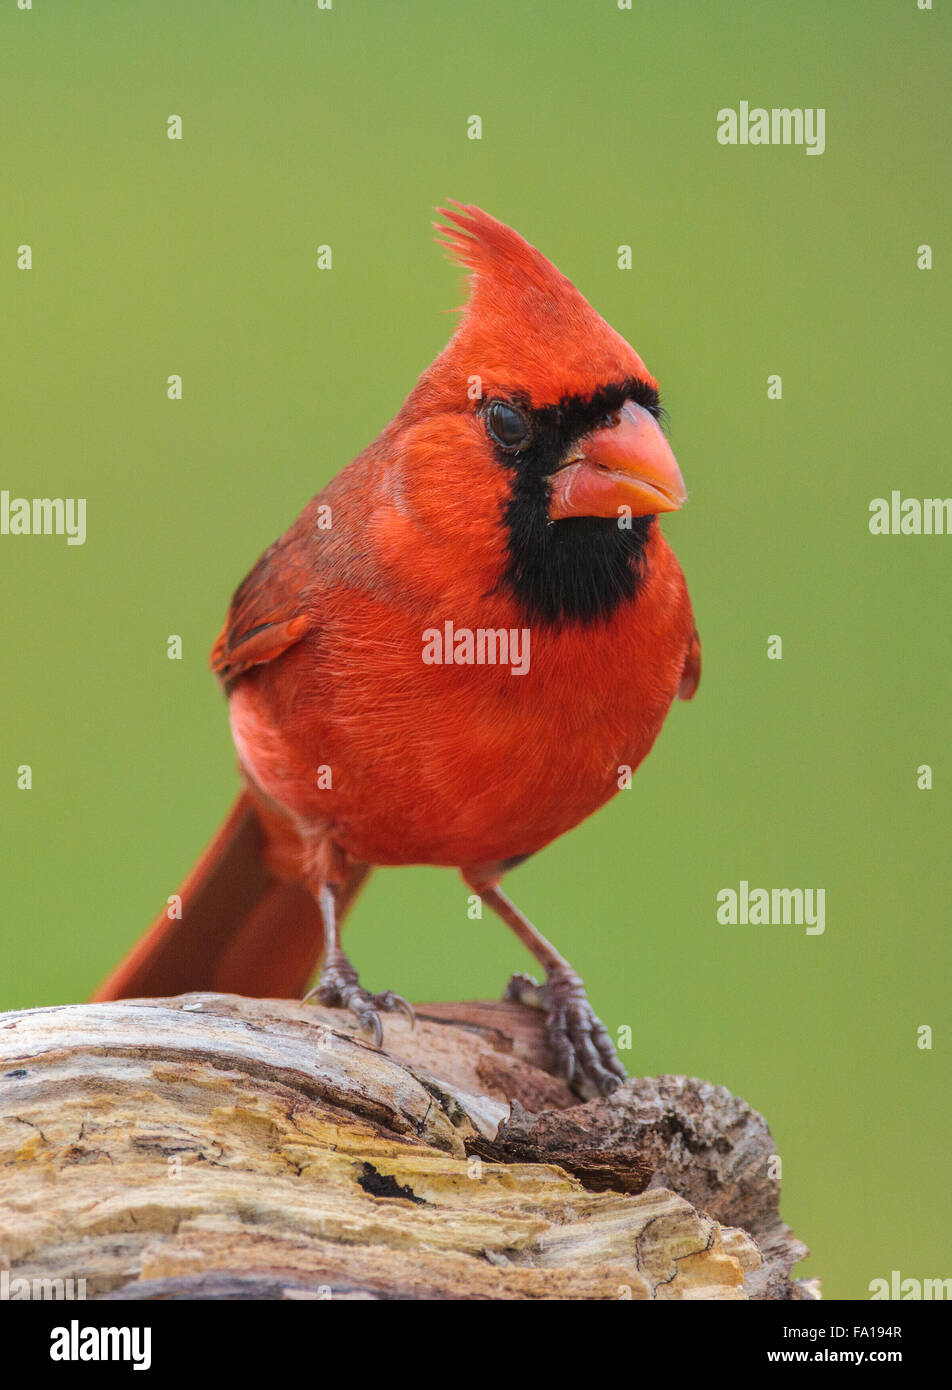 A northern cardinal perched on a log Stock Photo